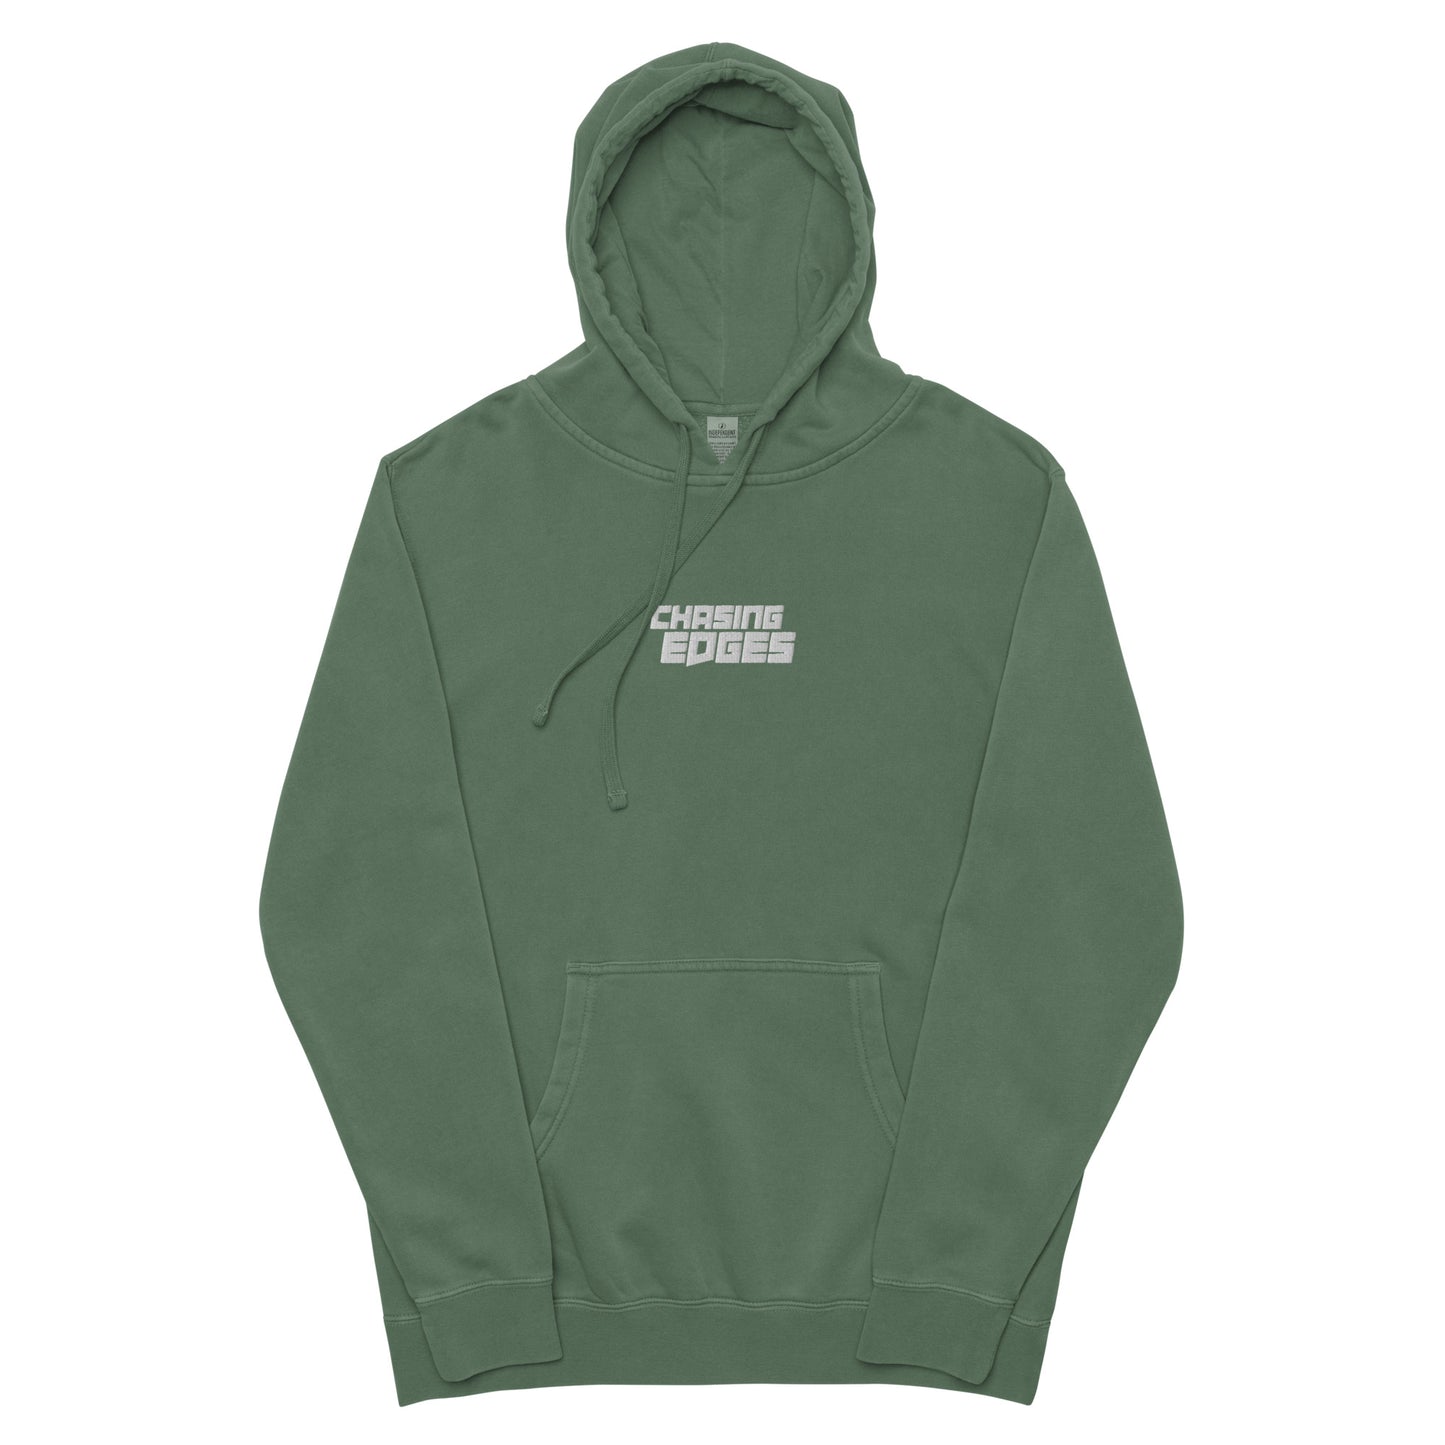 CHASING EDGES EMBROIDERED LOGO HOODIE (MORE COLORS)